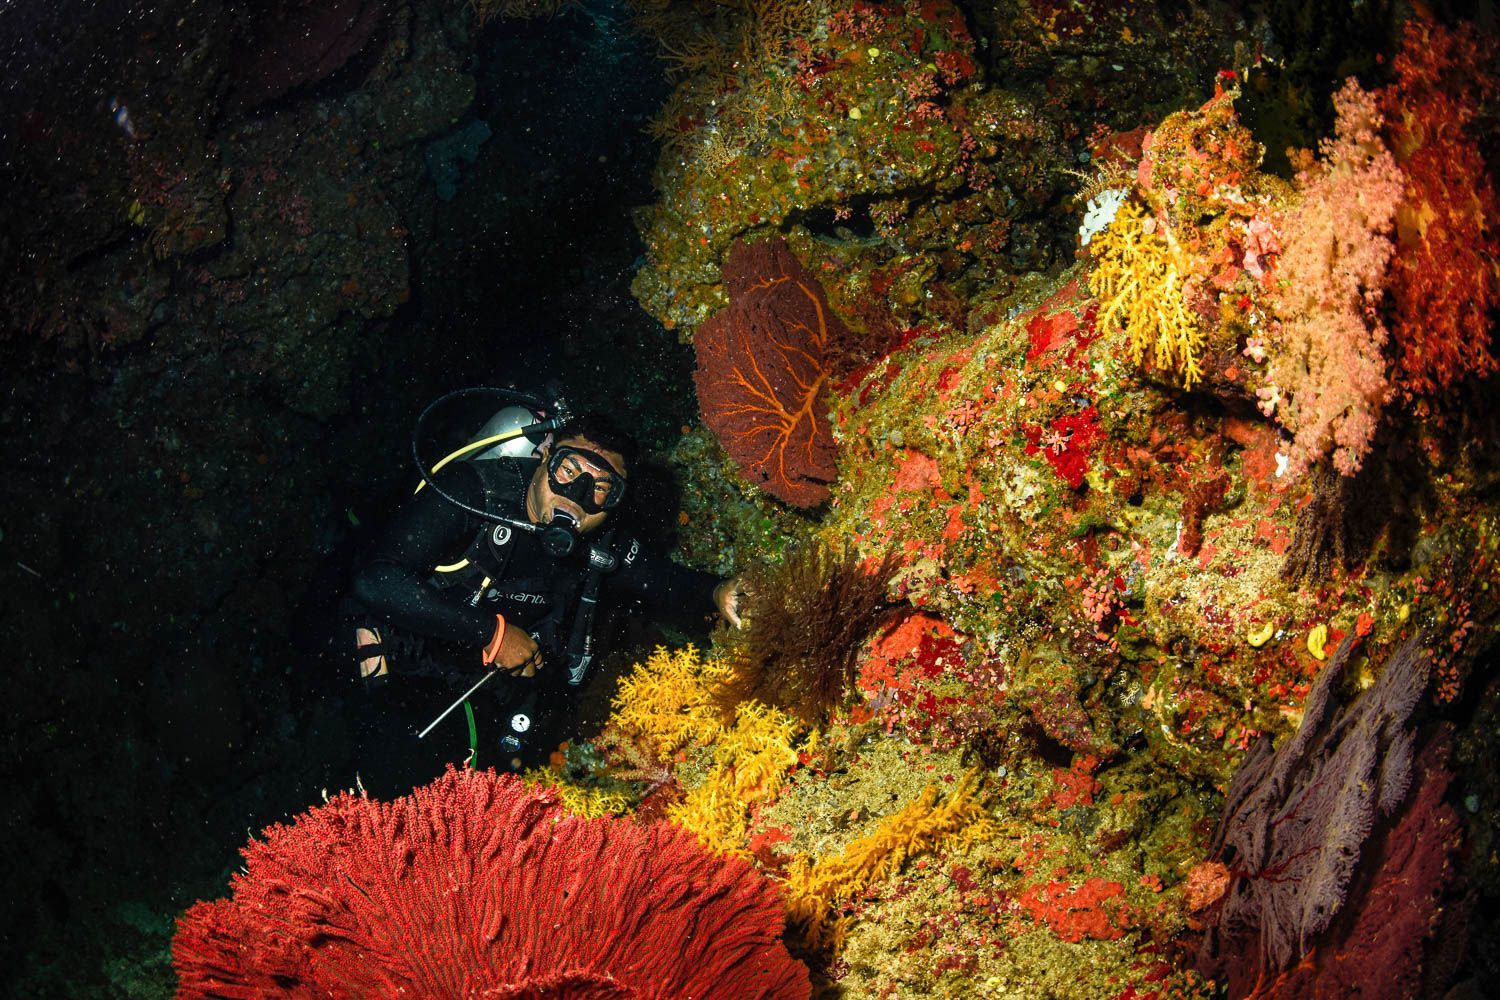 A diver explores a soft coral reef looking for macro 